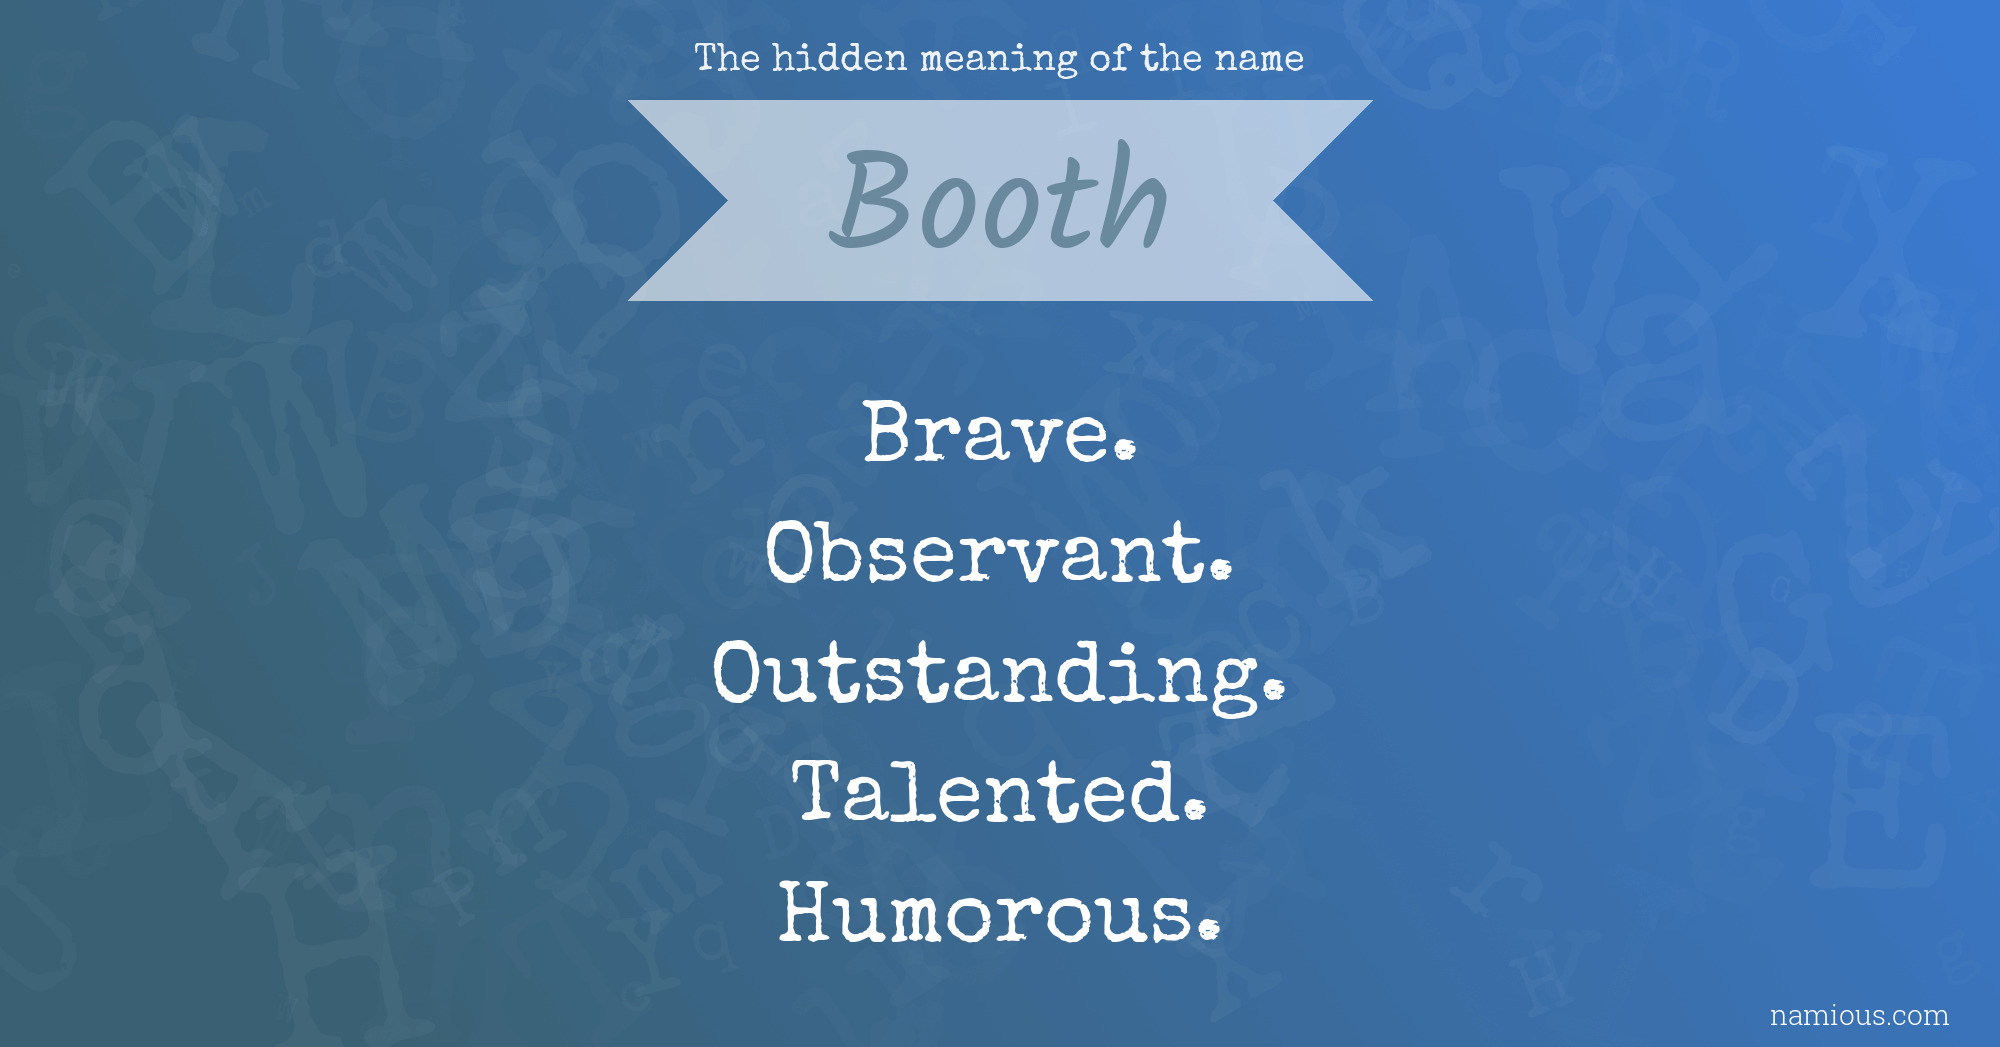 The hidden meaning of the name Booth